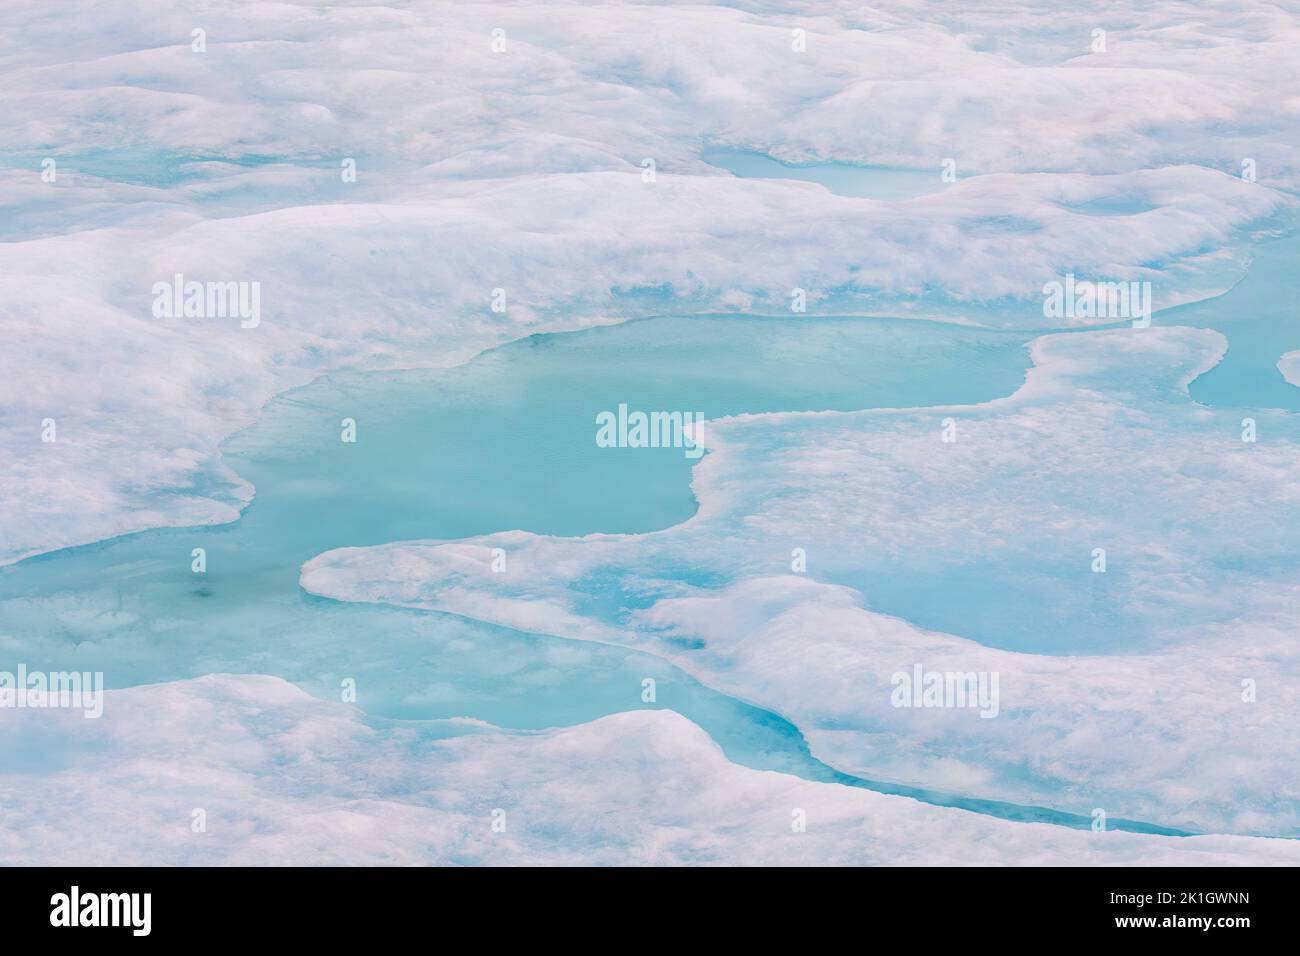 Abstract landscape with pools of aqua water in ice floes of high arctic. Stock Photo